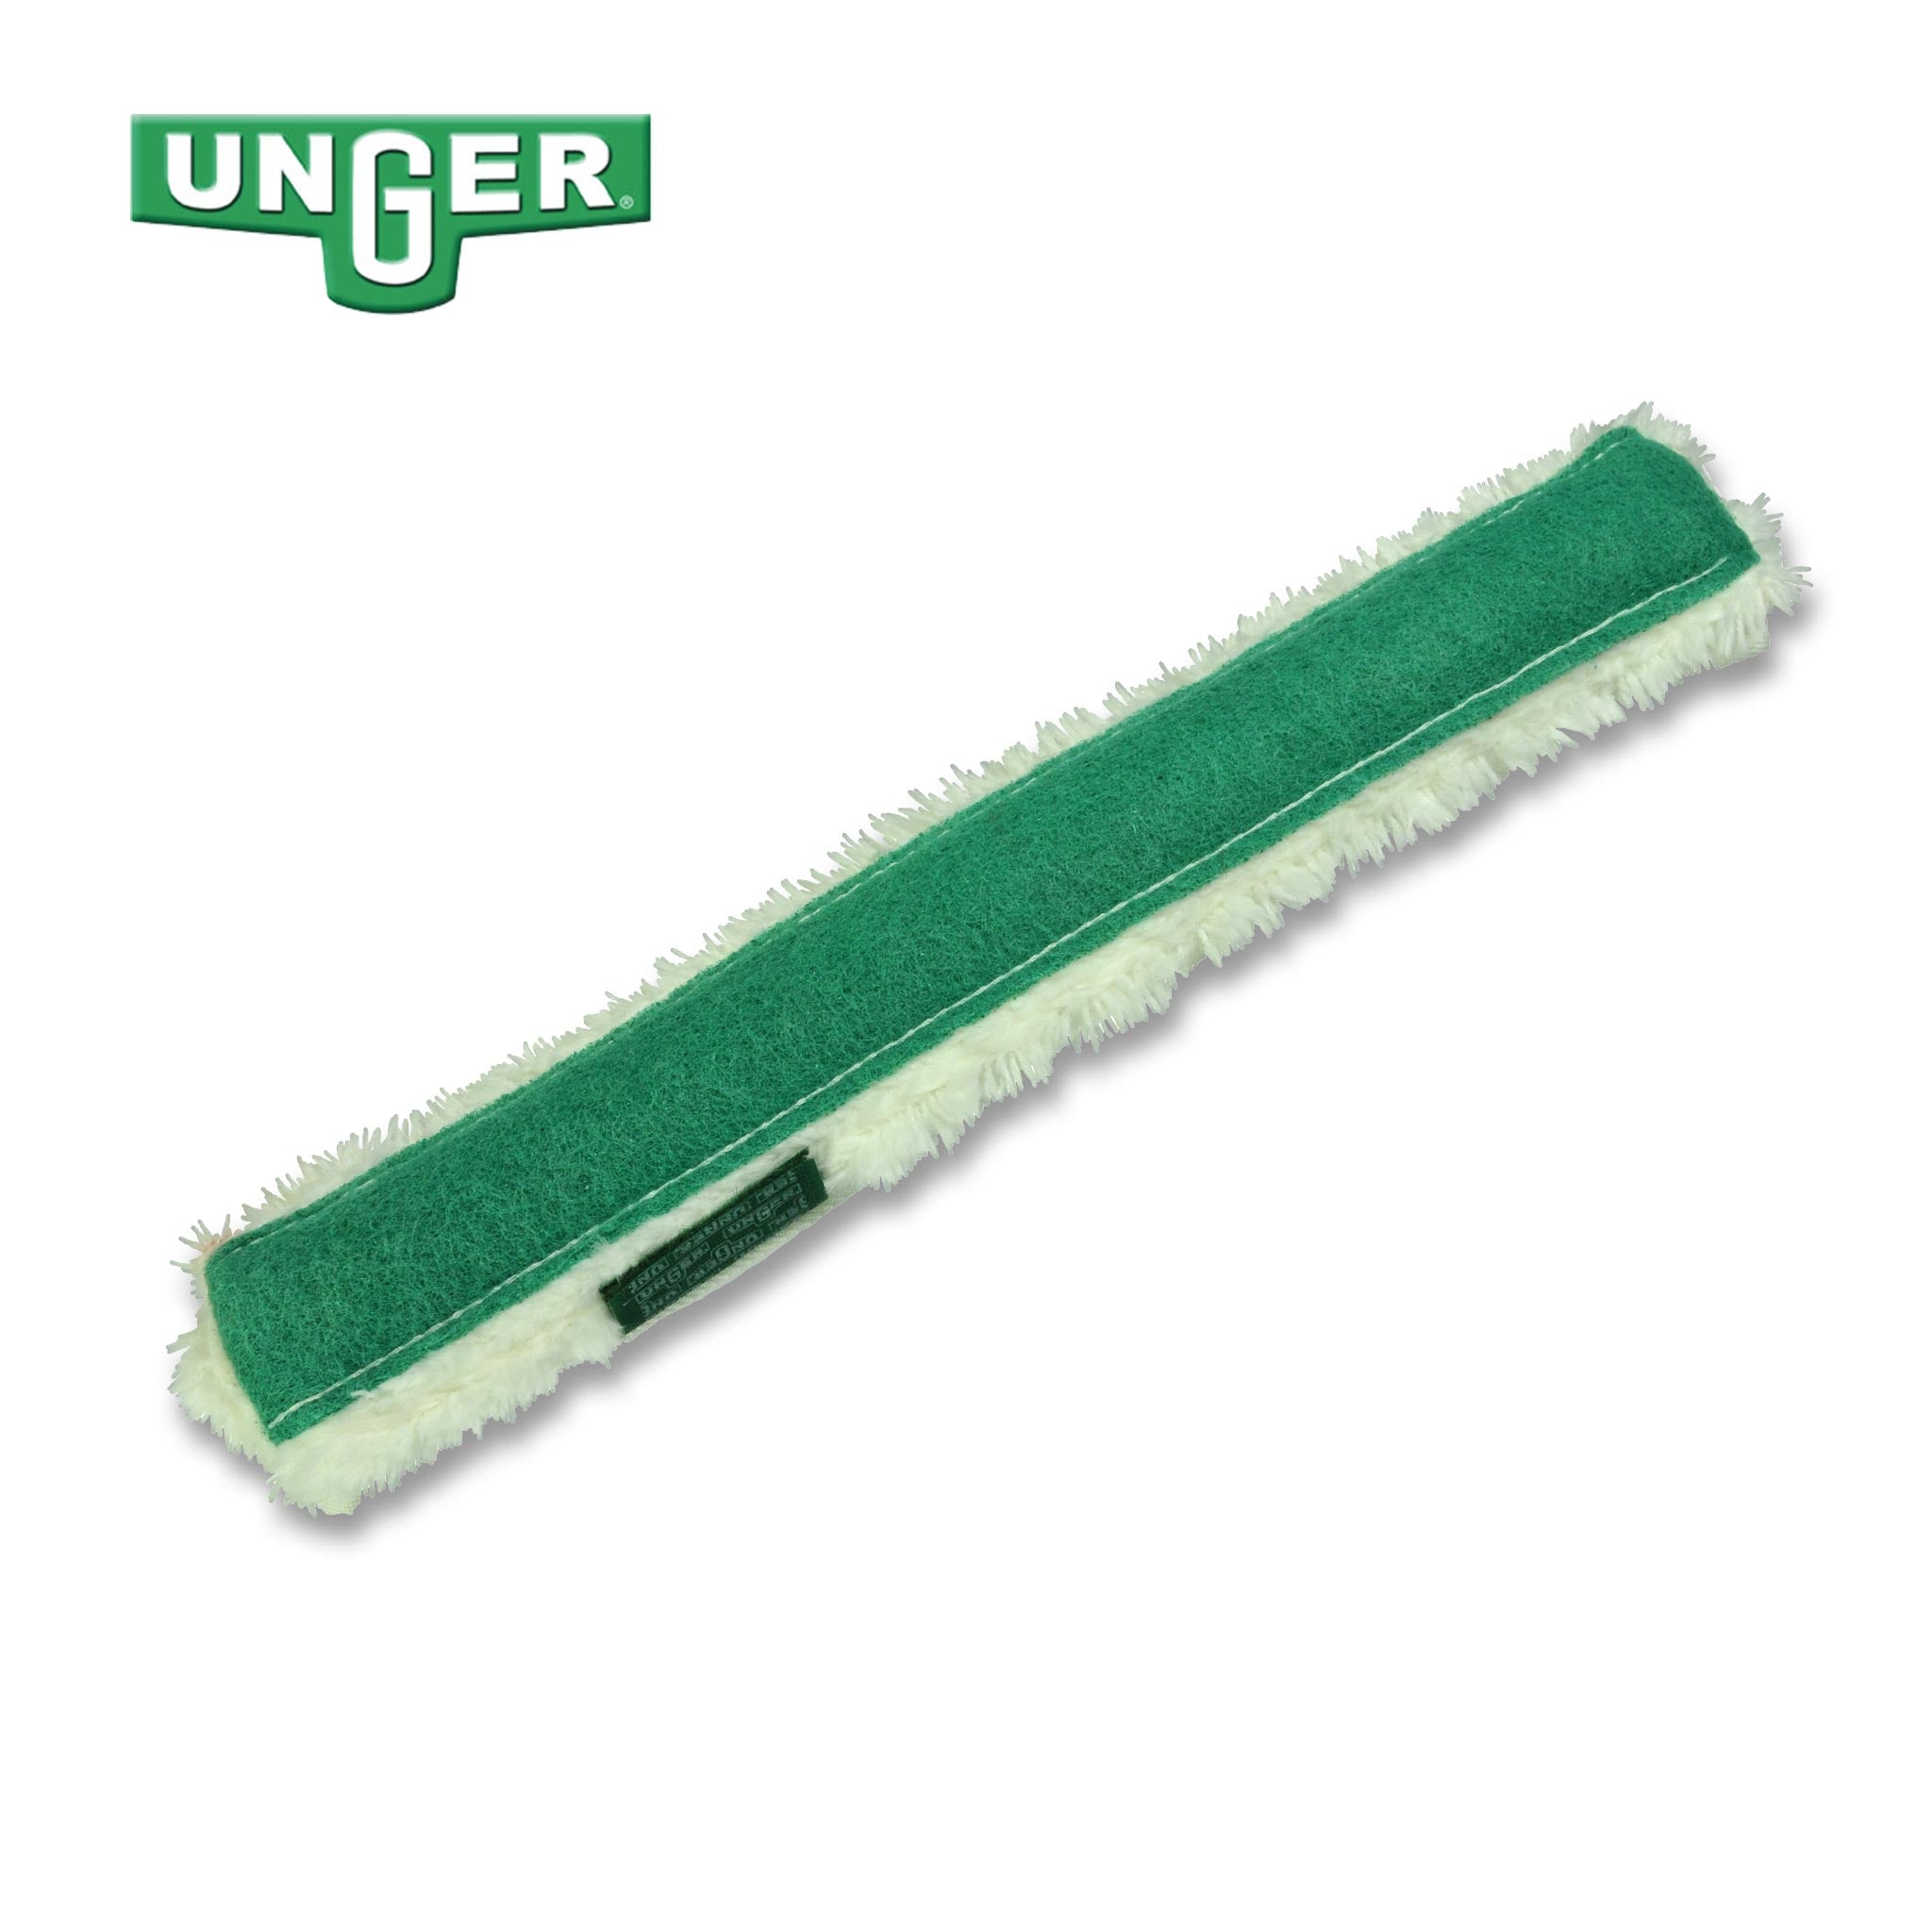 Unger Pad Washer Sleeve